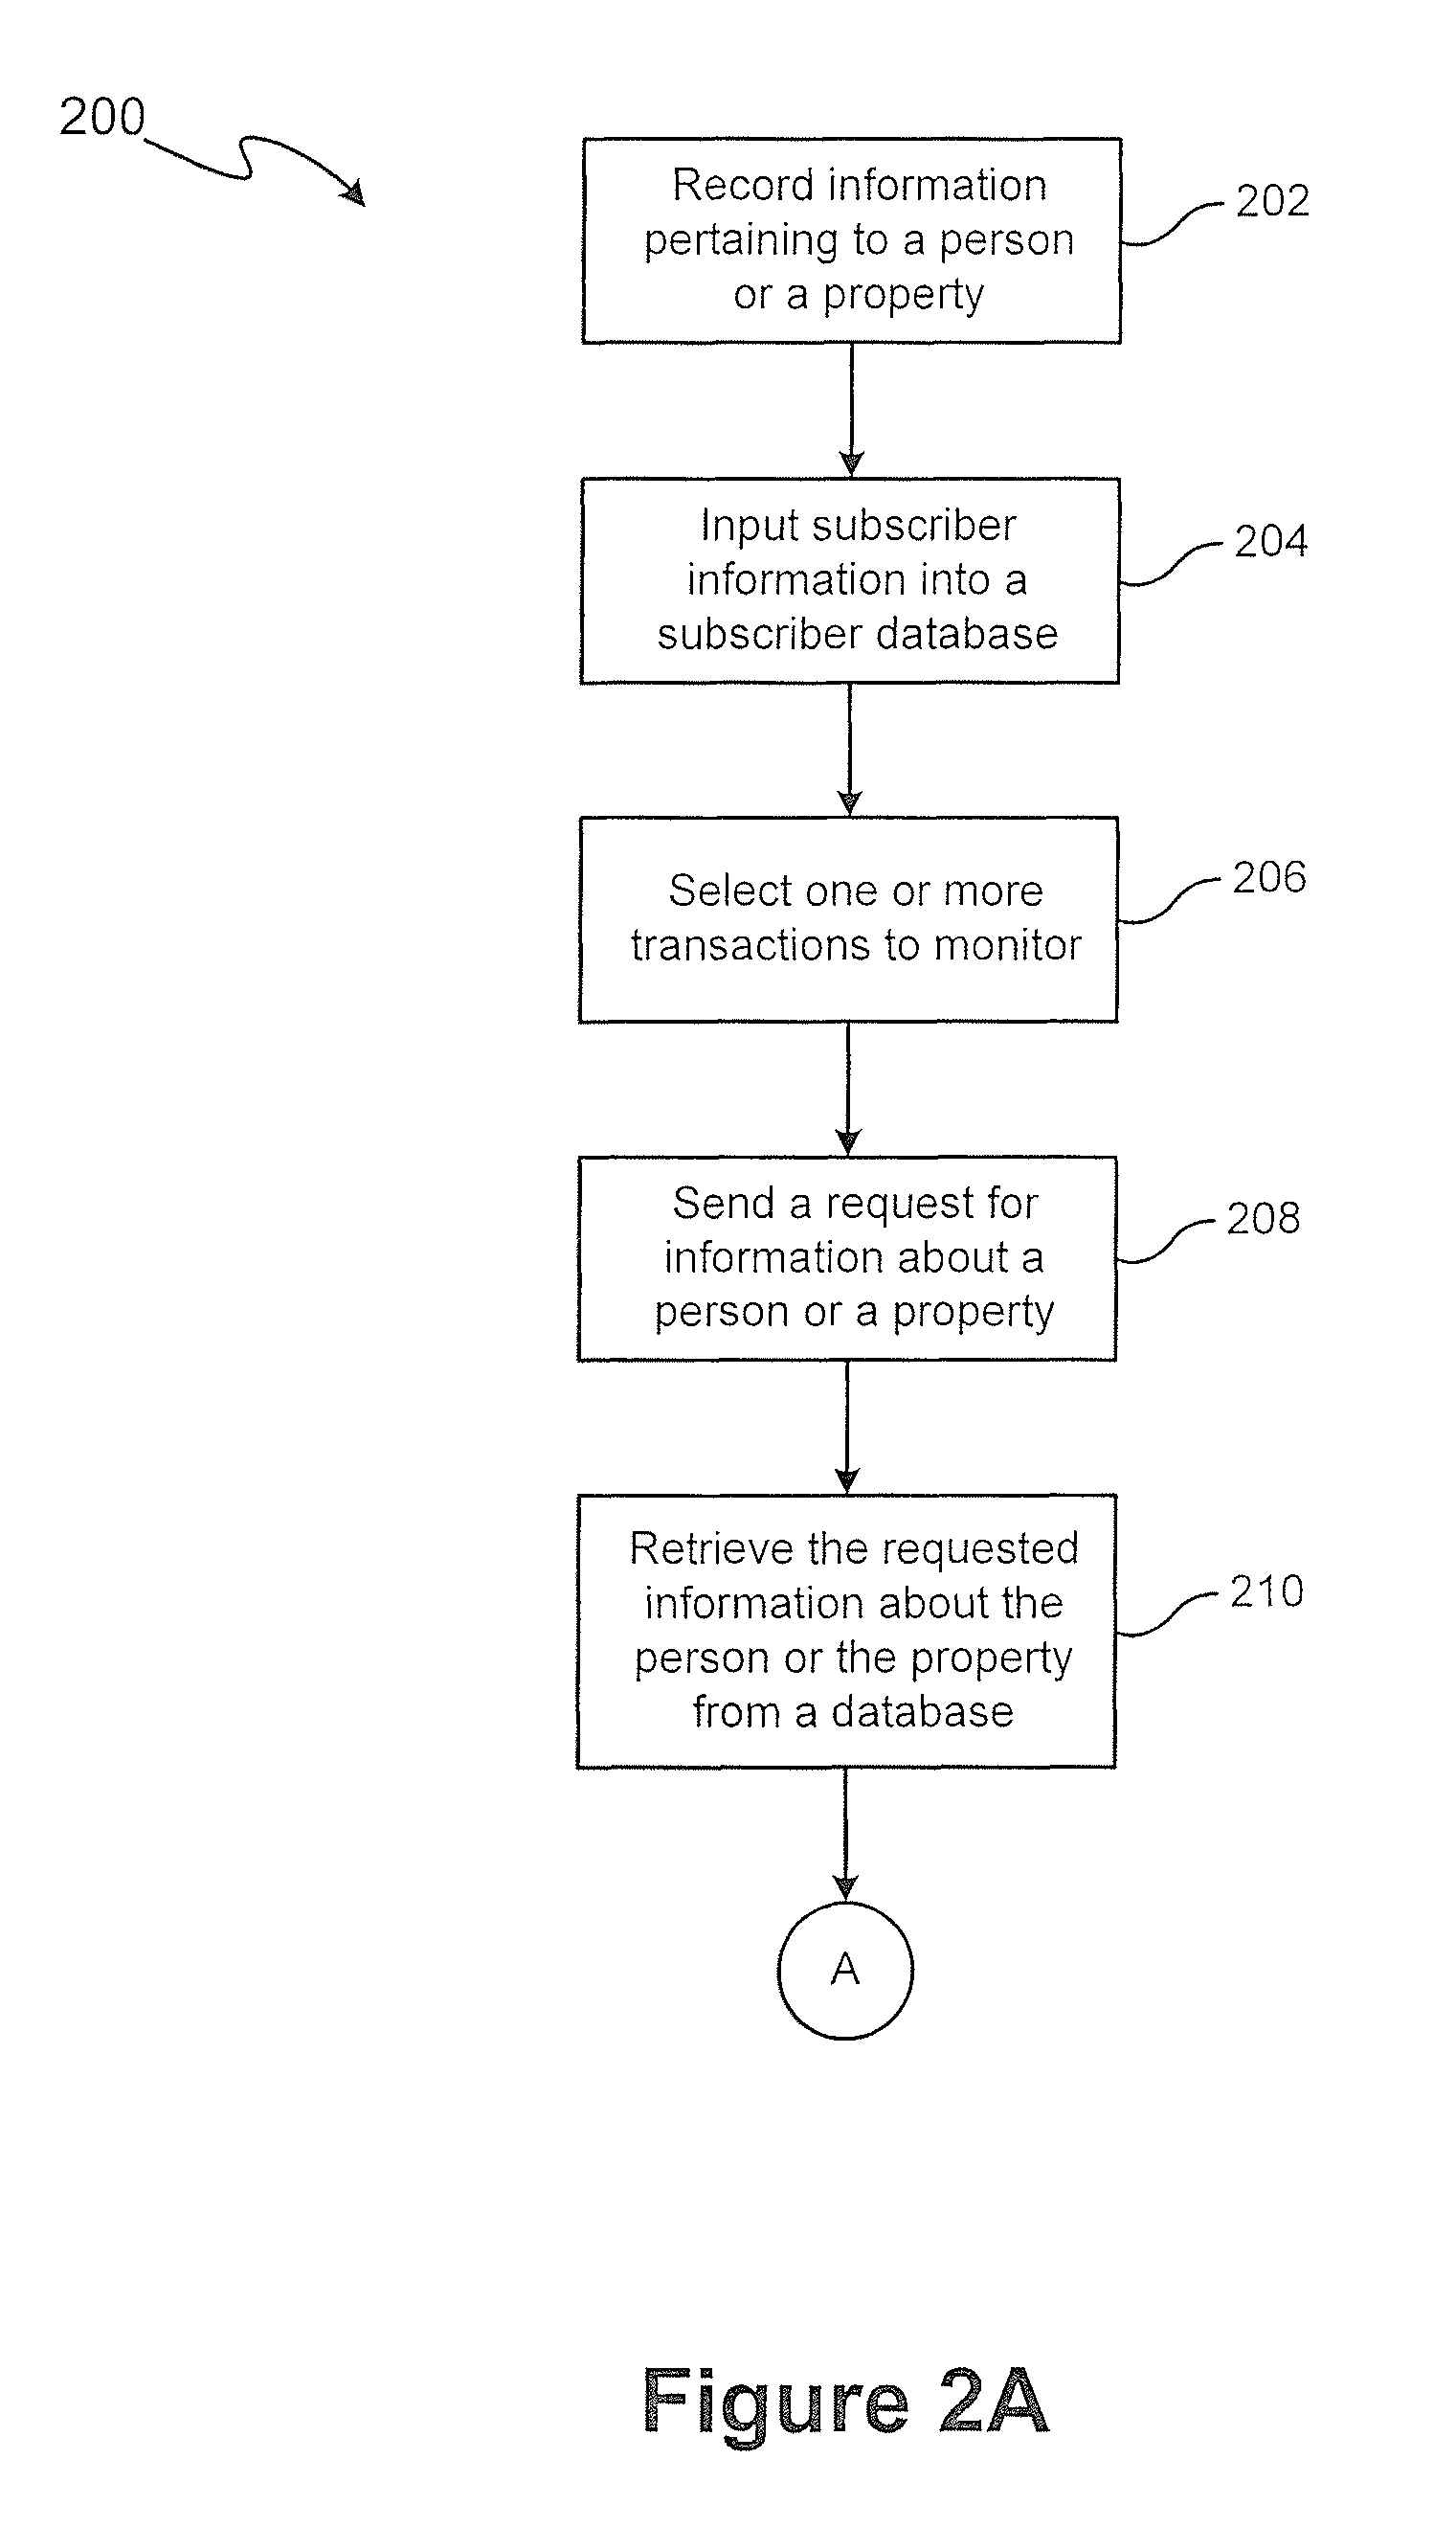 System and method for monitoring events associated with a person or property